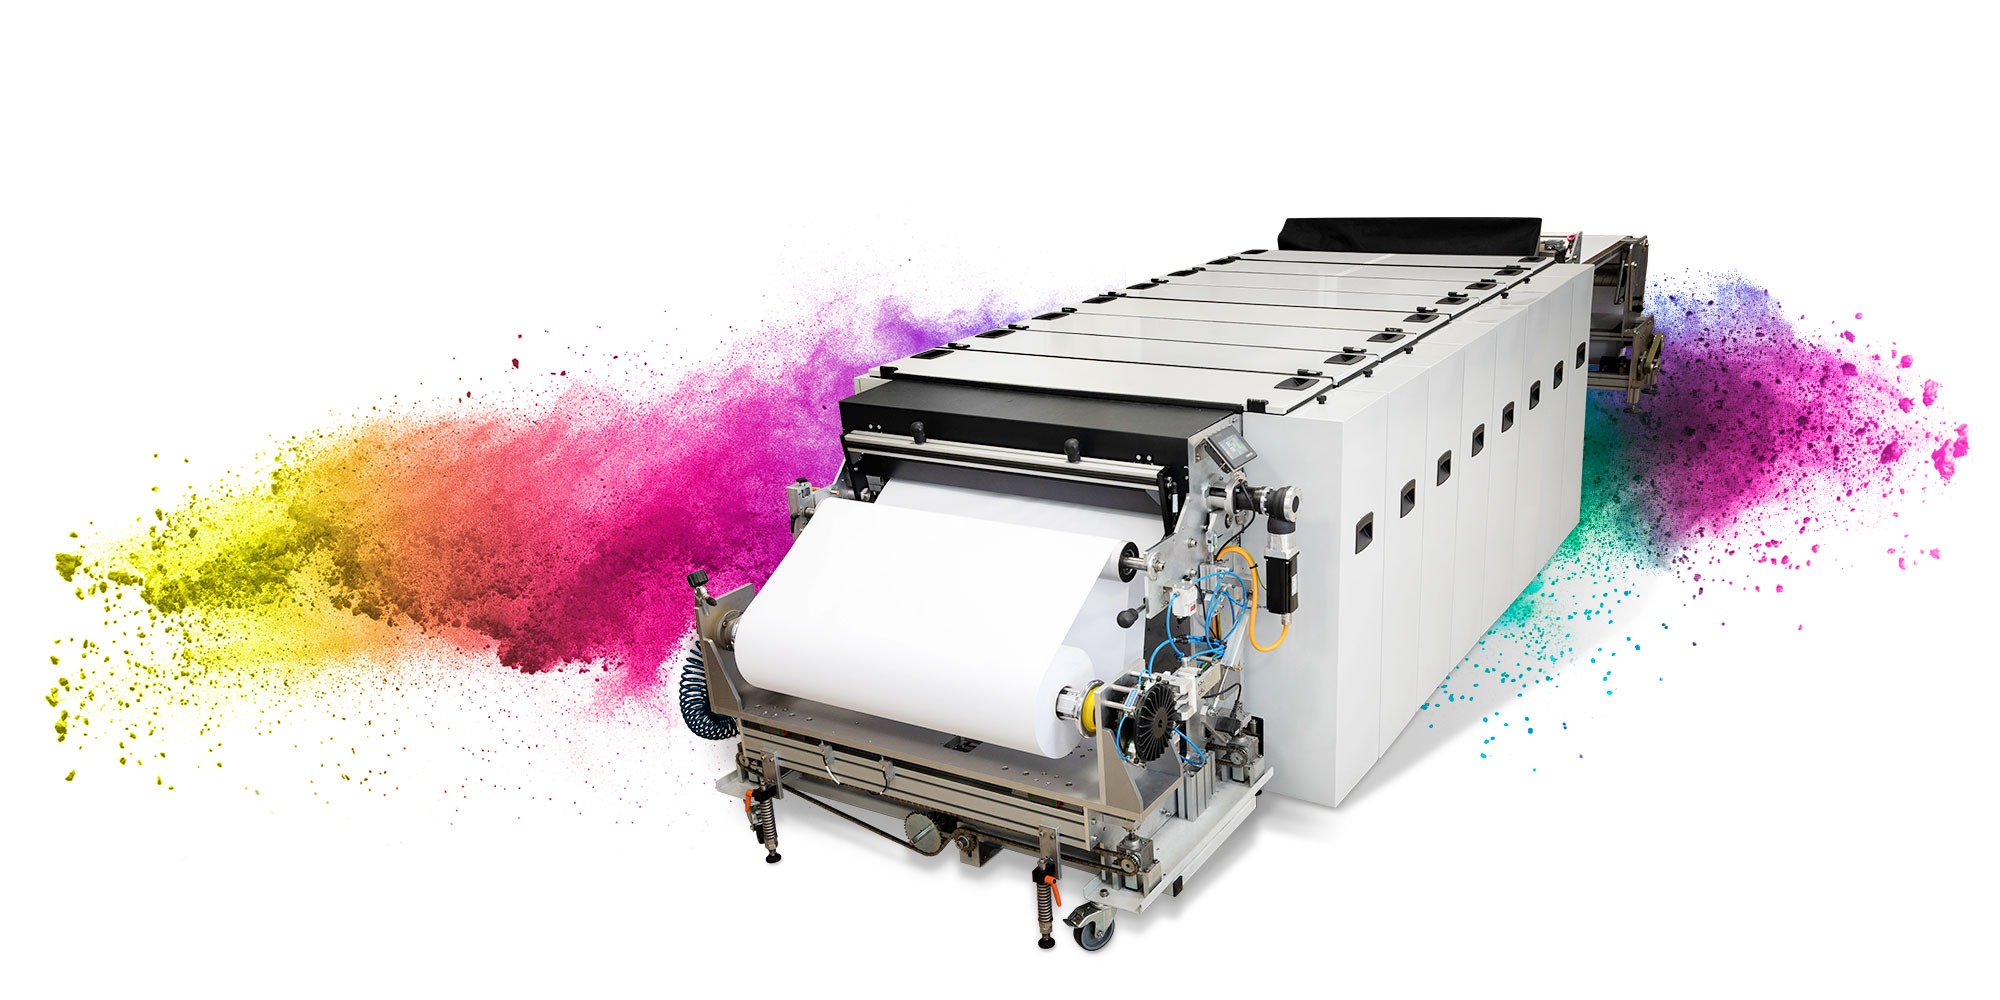 The picture shows the Ceramic Decal Printer XT. It prints ceramic decals in large format and decals for the tableware industry.